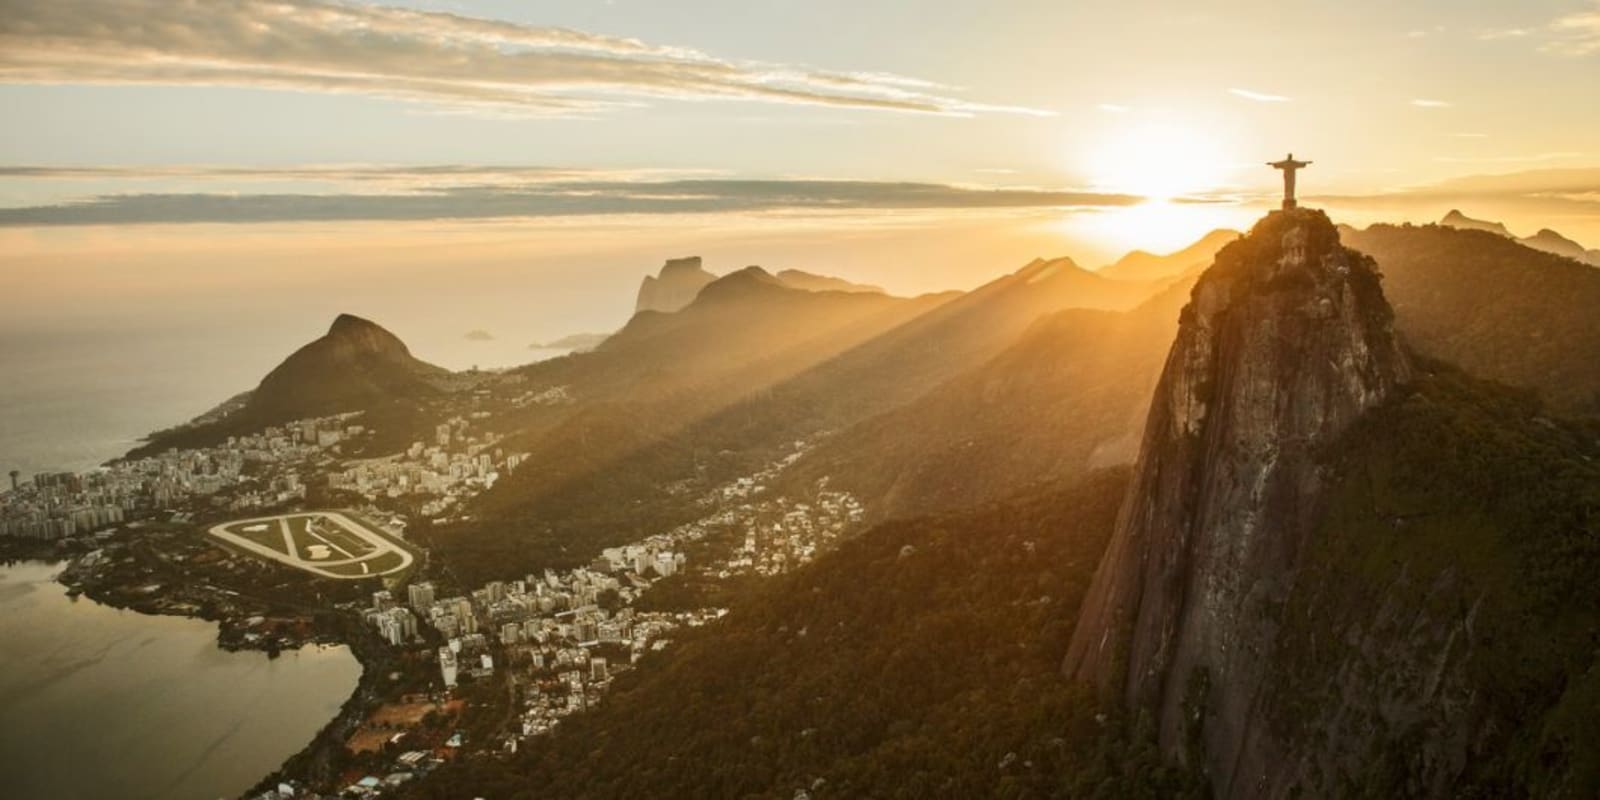 A long shot of the sun setting behind the Christ The Redeemer statue in Brazil